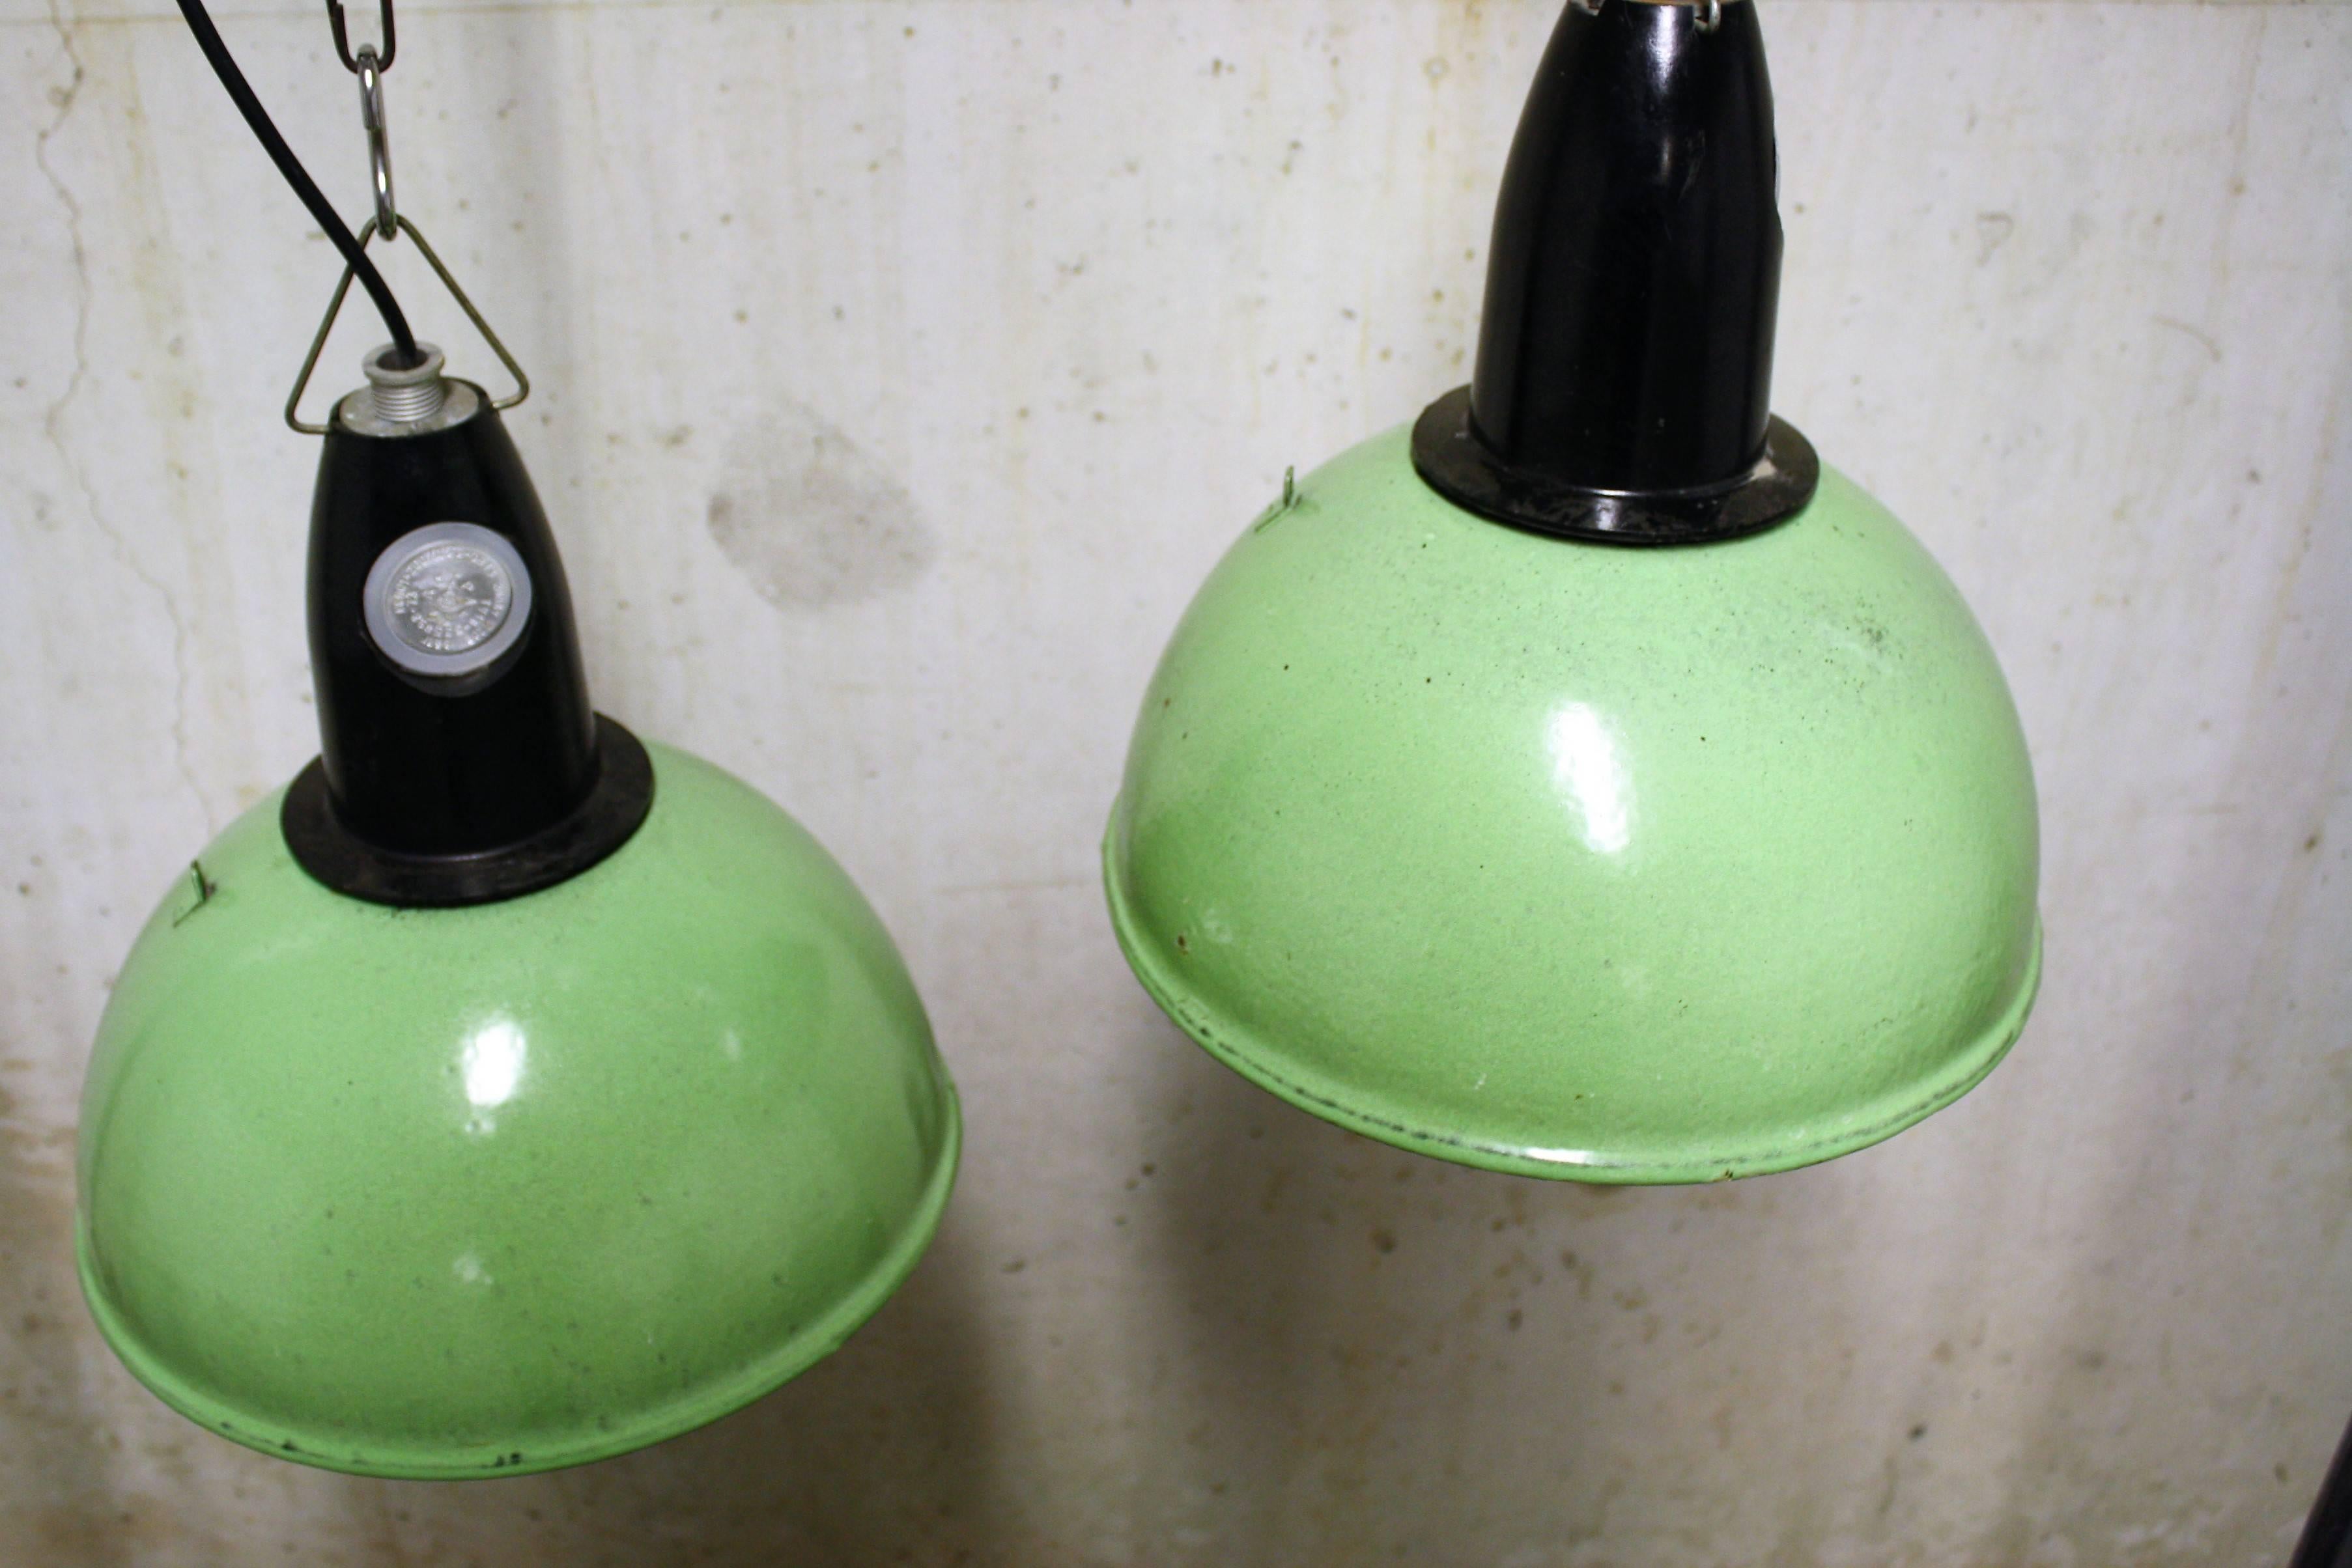 Splendid mint green Industrial pendant lamps made from enamelled metal and bakelite.

This type of lamps was popular in de 20th century due to their easy to produce shape and durability. 

Today these lamps are popular in home interiors, bars,